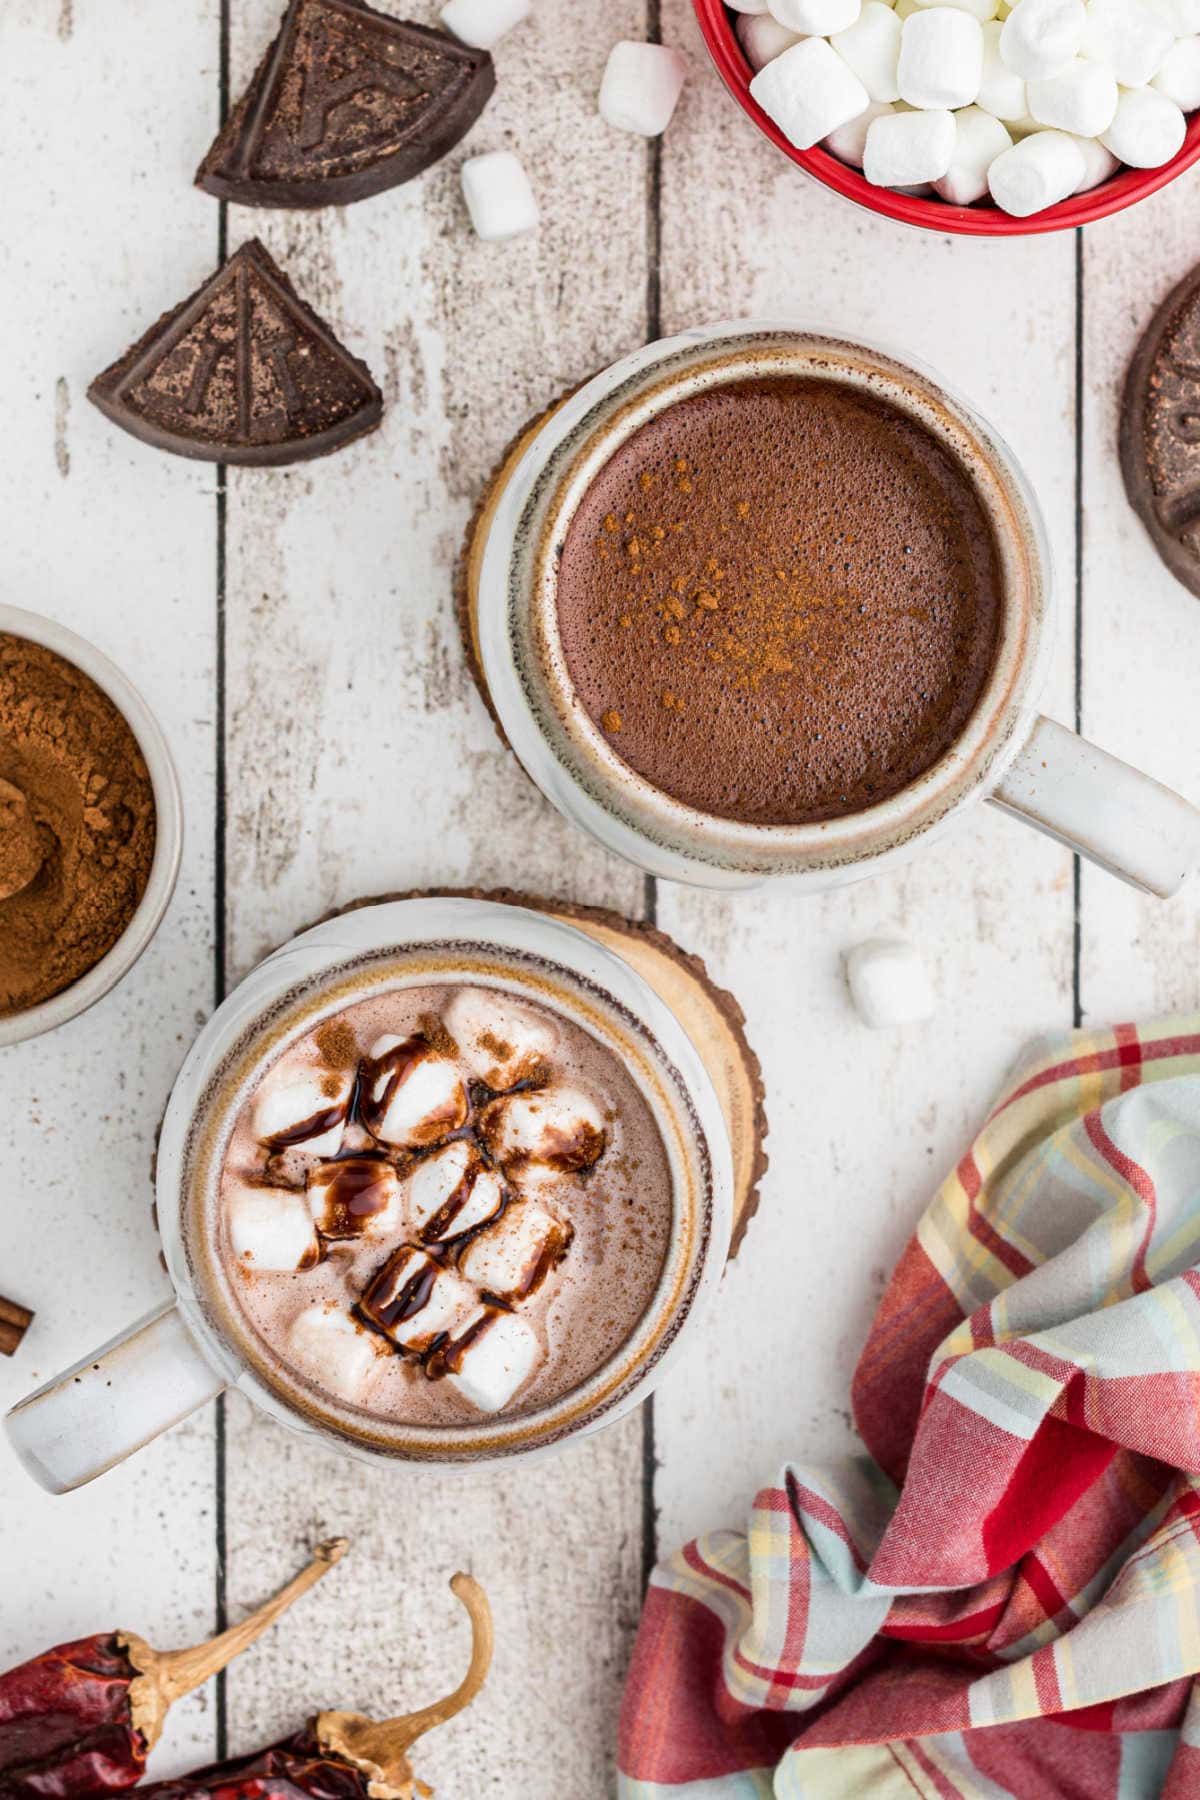 Overhead view of two cups of hot chocolate with ingredients on the table nearby.